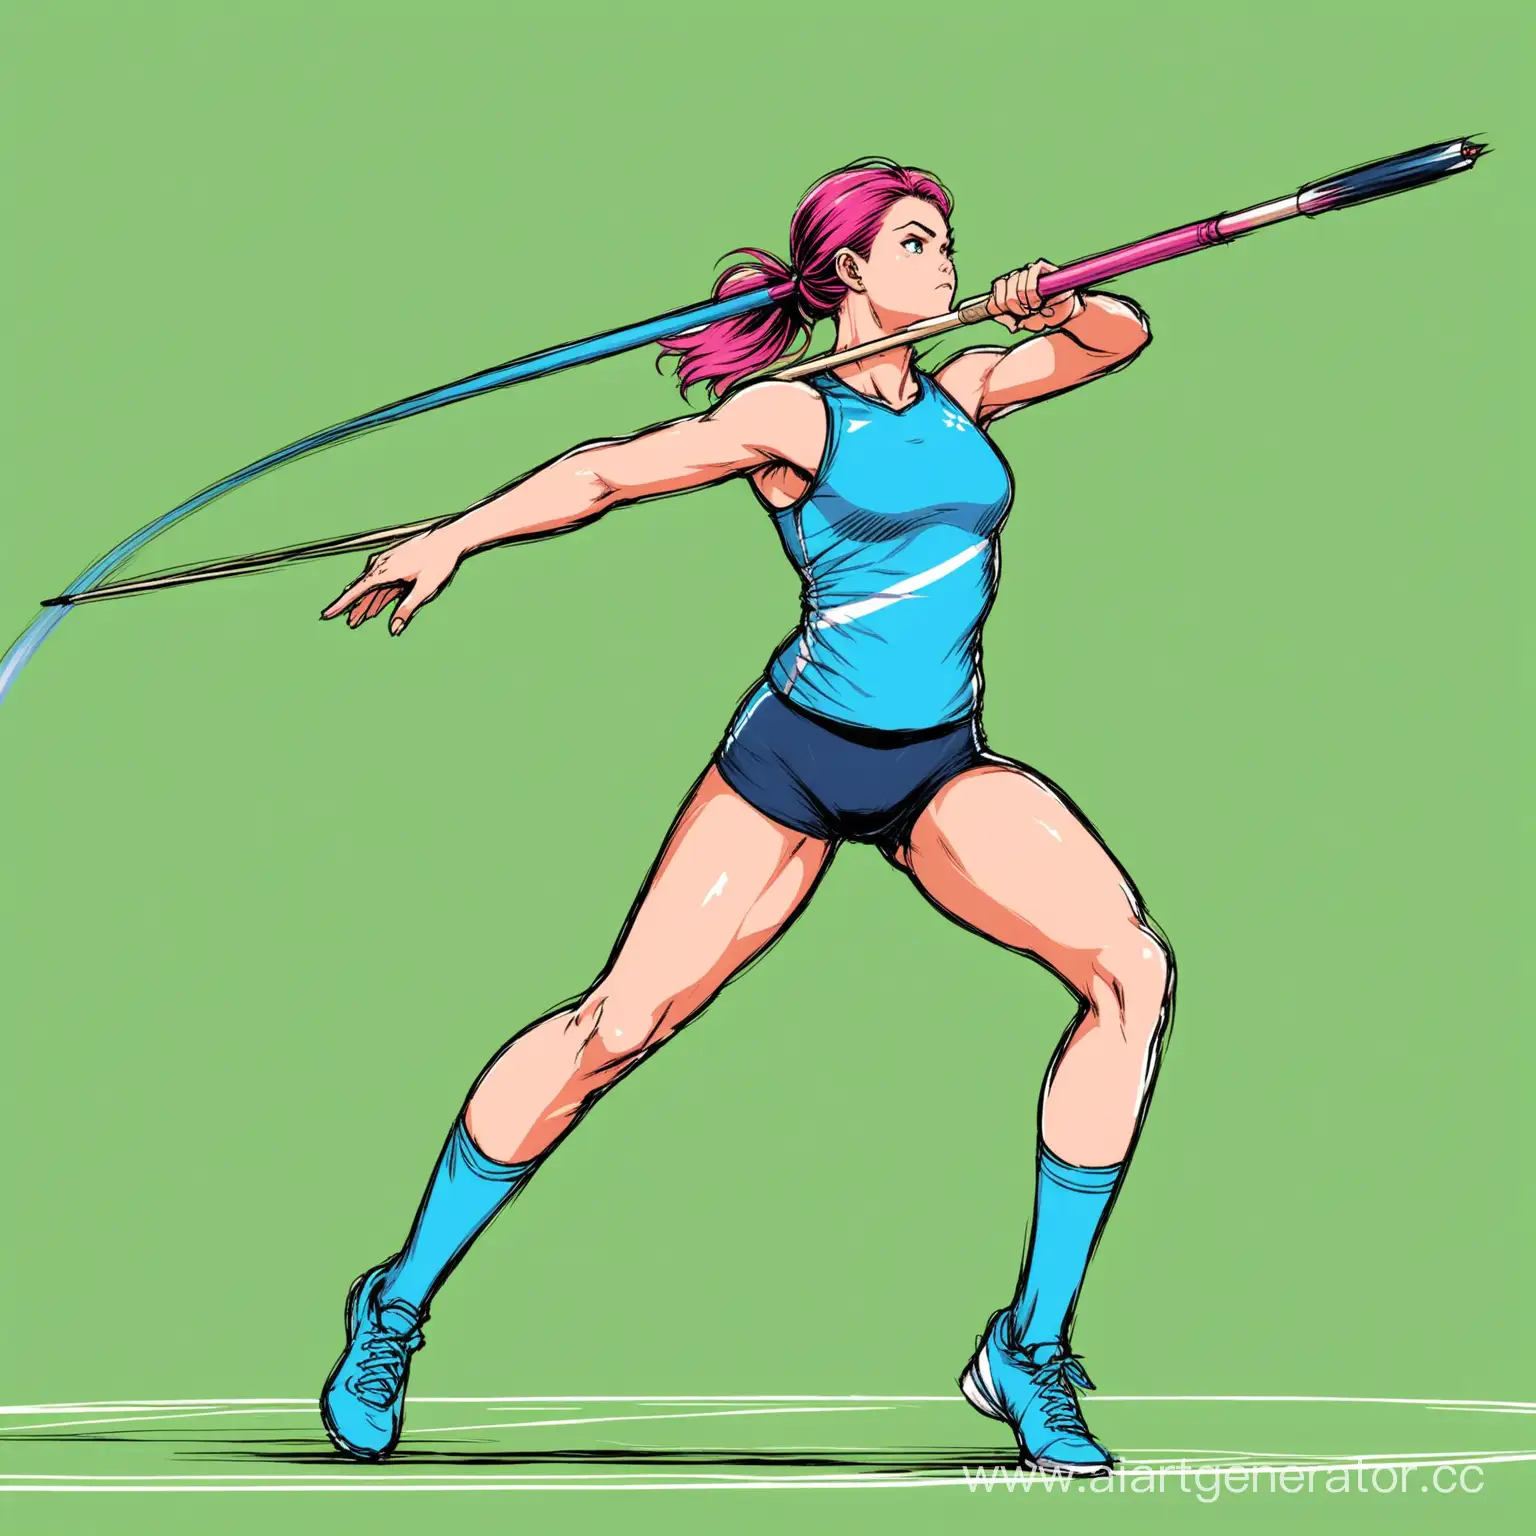 Athlete-in-Action-Javelin-Thrower